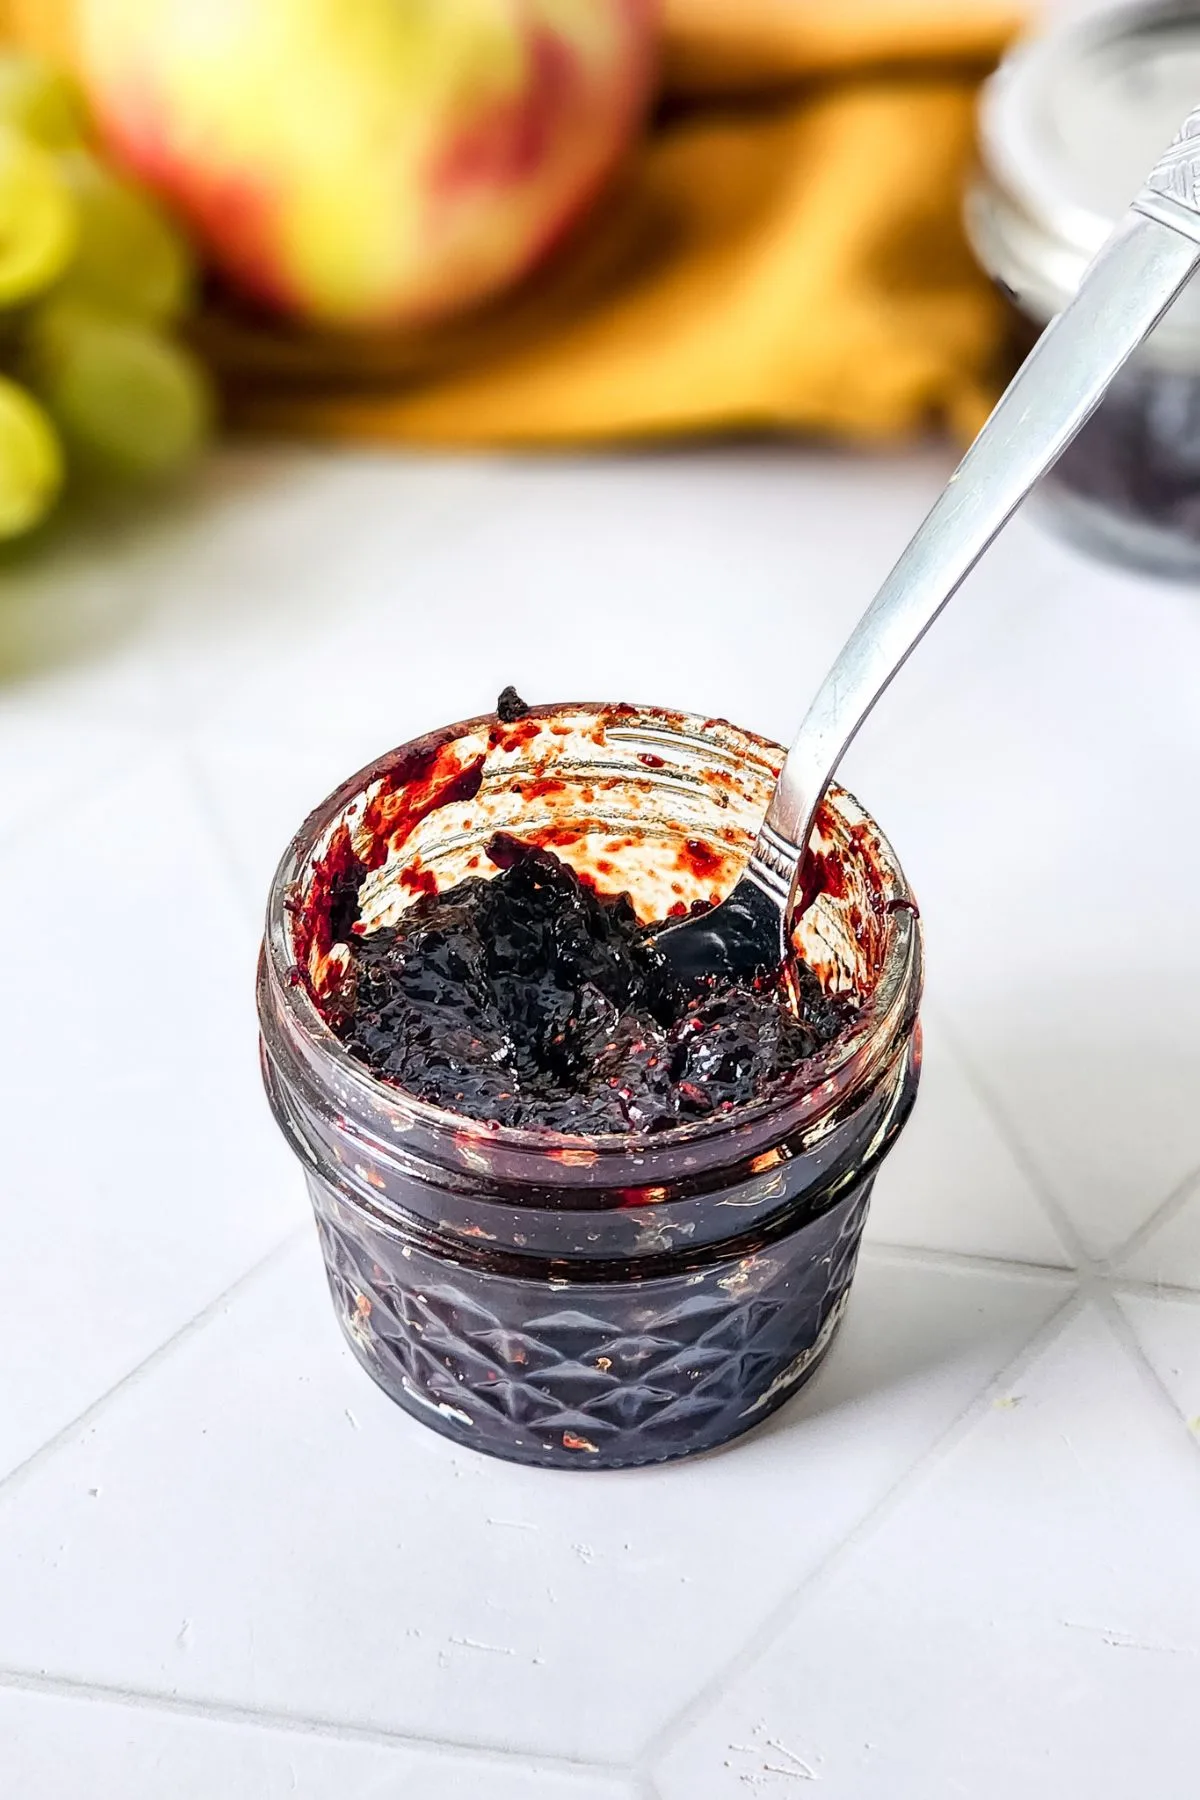 A spoon in a jar of Mixed Berry Jam.